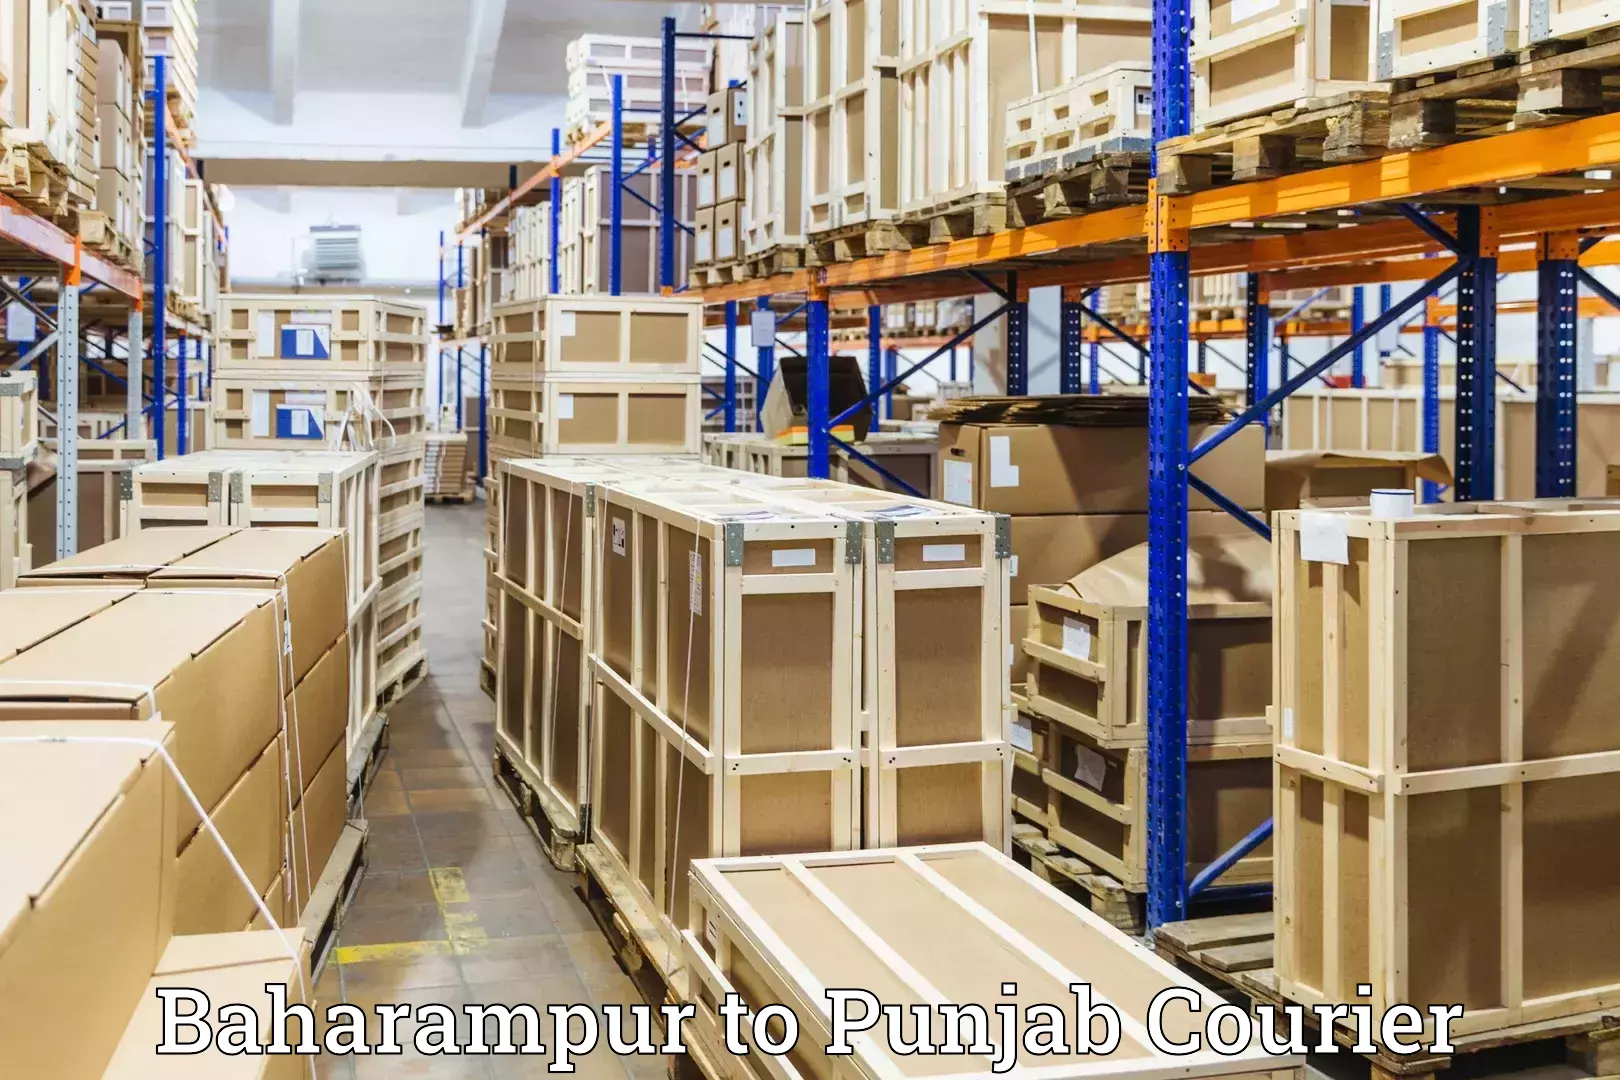 Luggage delivery system Baharampur to Patiala